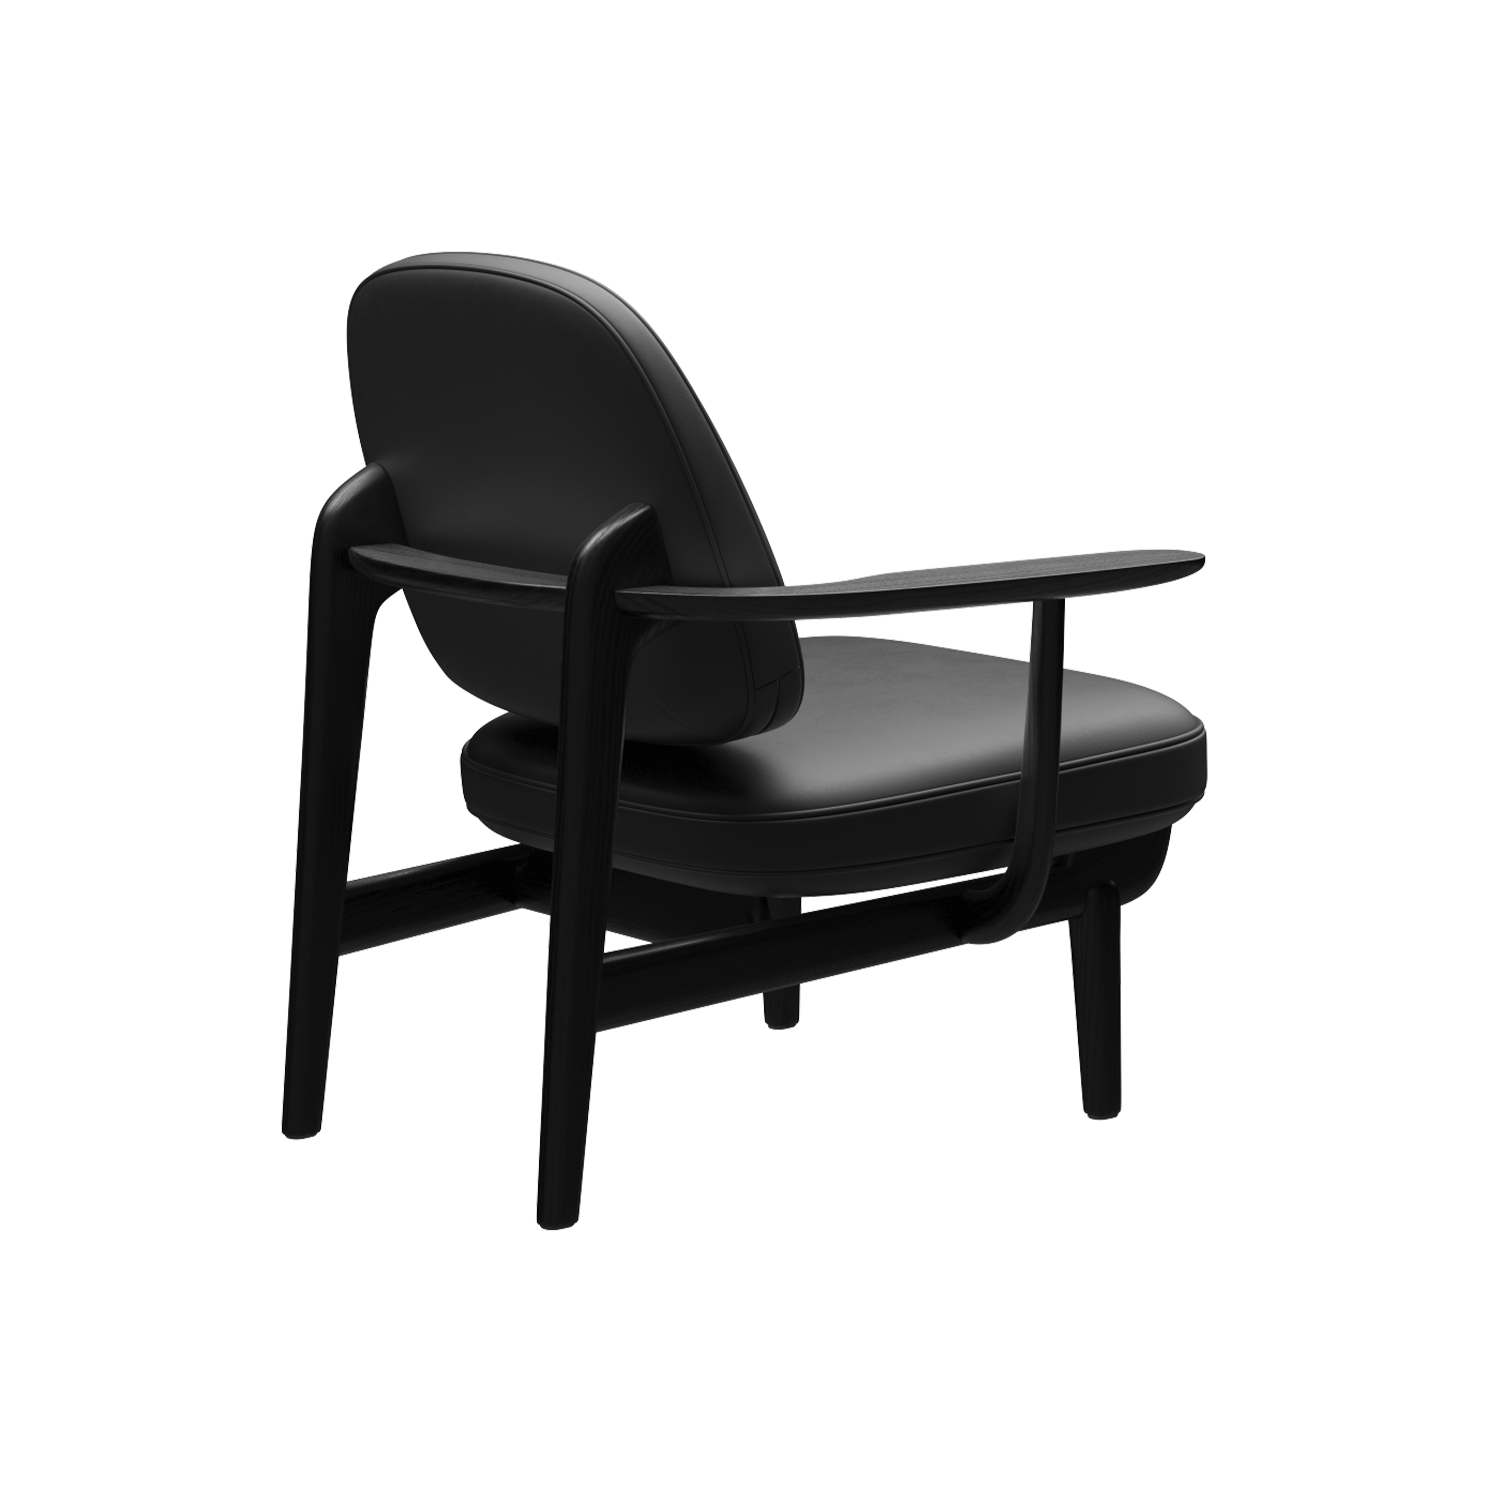 Fred lounge chair, black leather